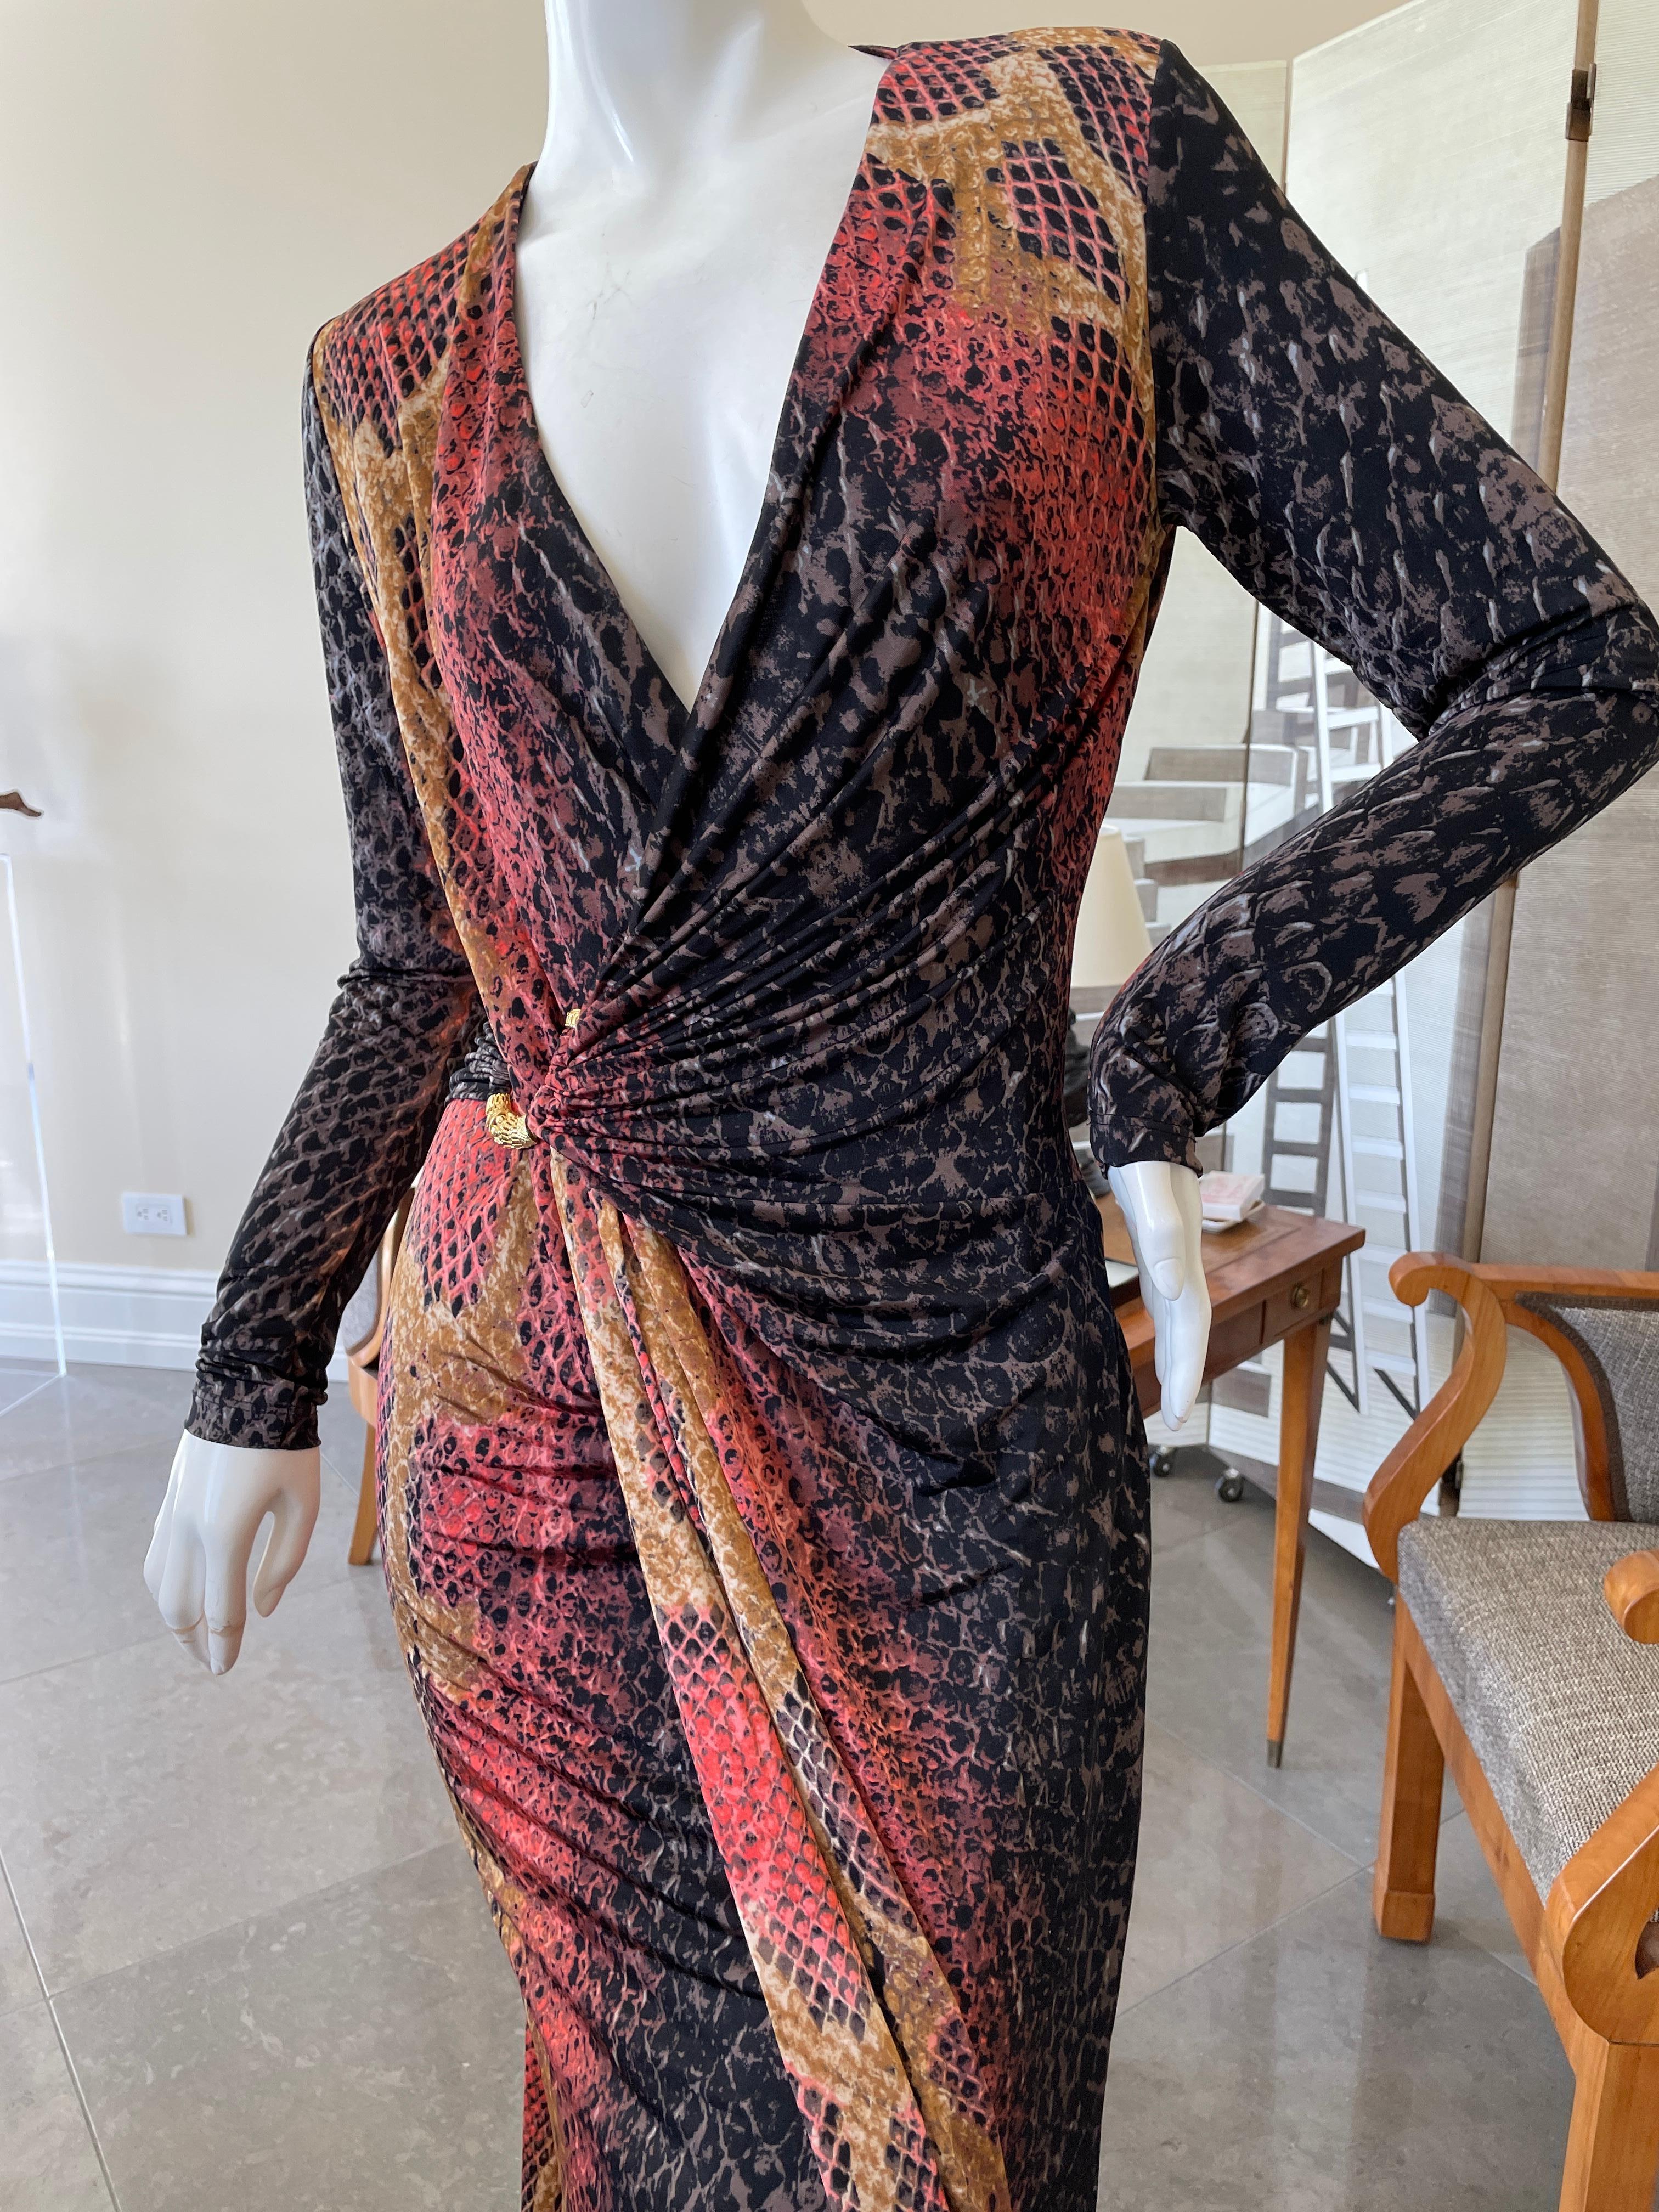 Roberto Cavalli Plunging Vintage Reptile Print Evening Dress  In Excellent Condition For Sale In Cloverdale, CA